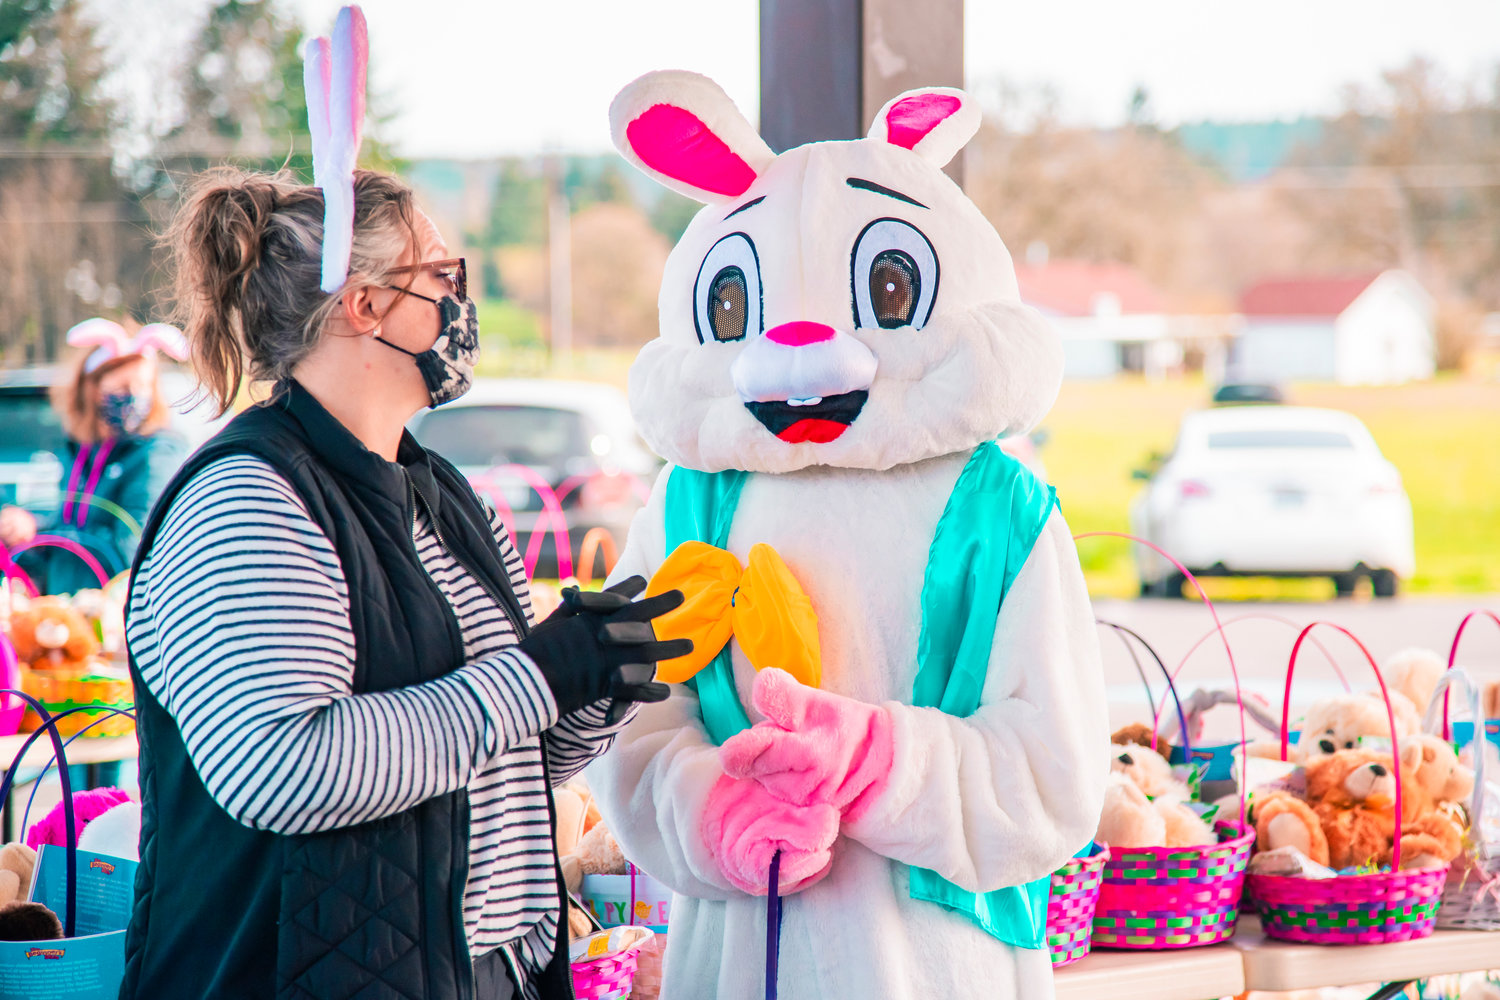 The Easter Bunny mingles at Bethel Church during an Easter event on Saturday in Chehalis.